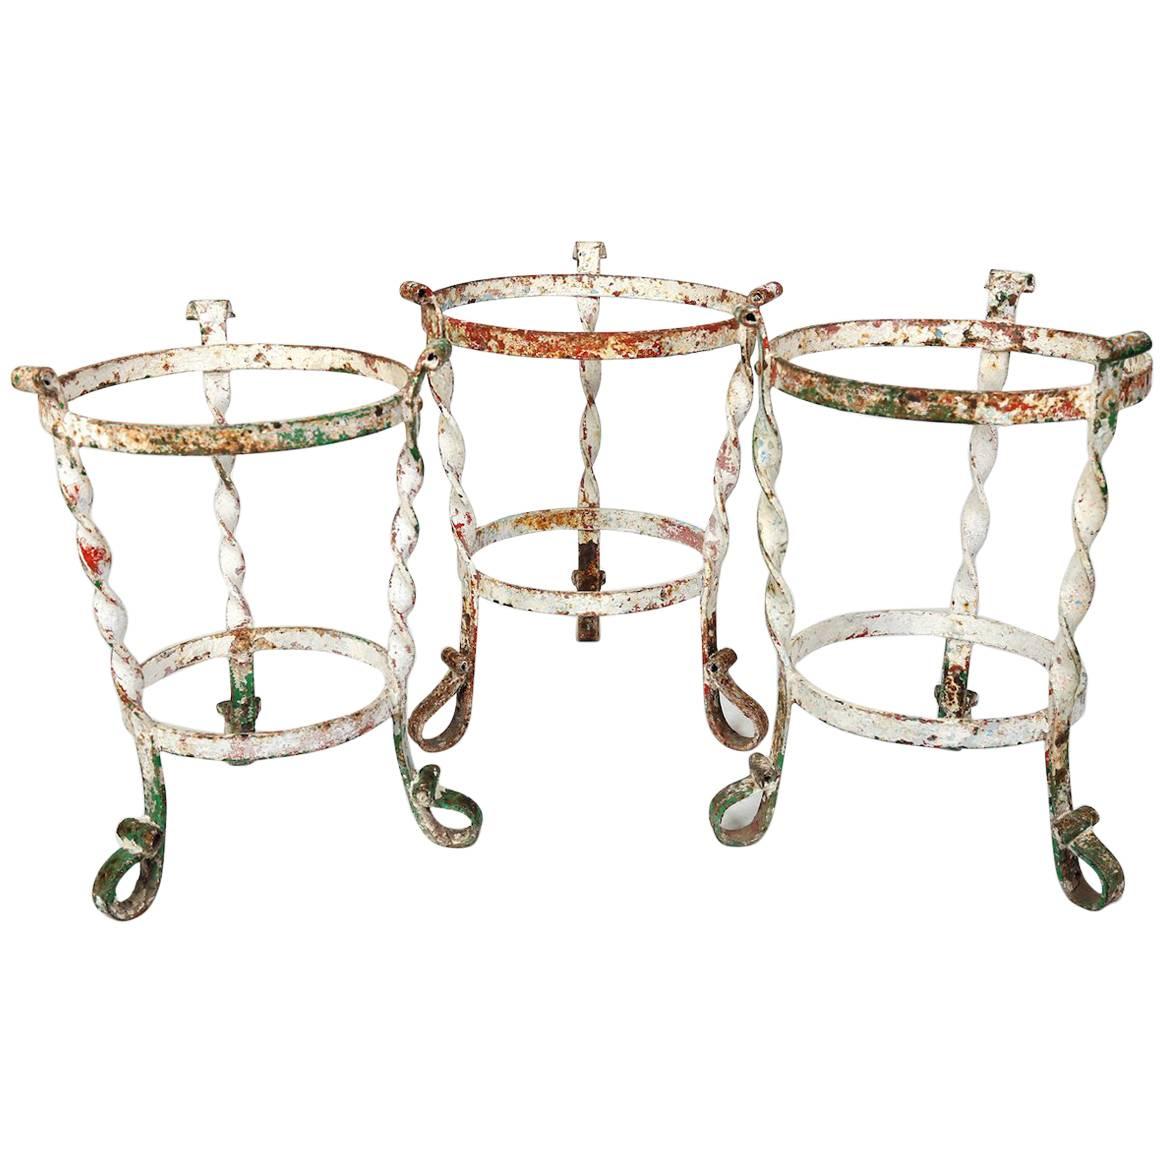 Set of Three Jardinieres or Cachepots Made of Wrought Iron, circa 1900, France For Sale